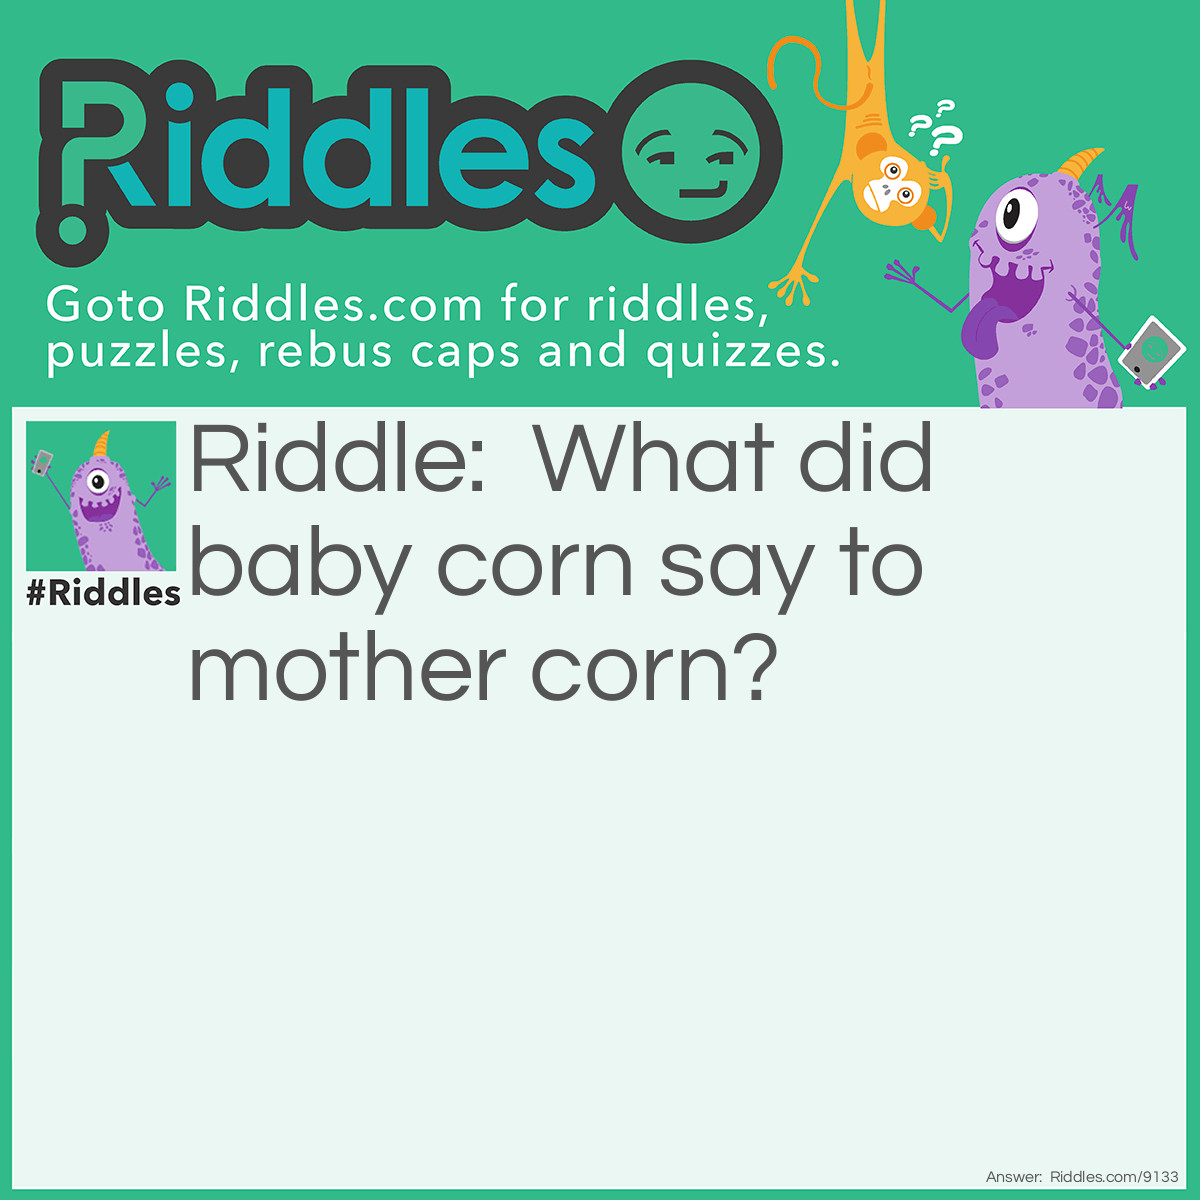 Riddle: What did baby corn say to mother corn? Answer: Where is popcorn.